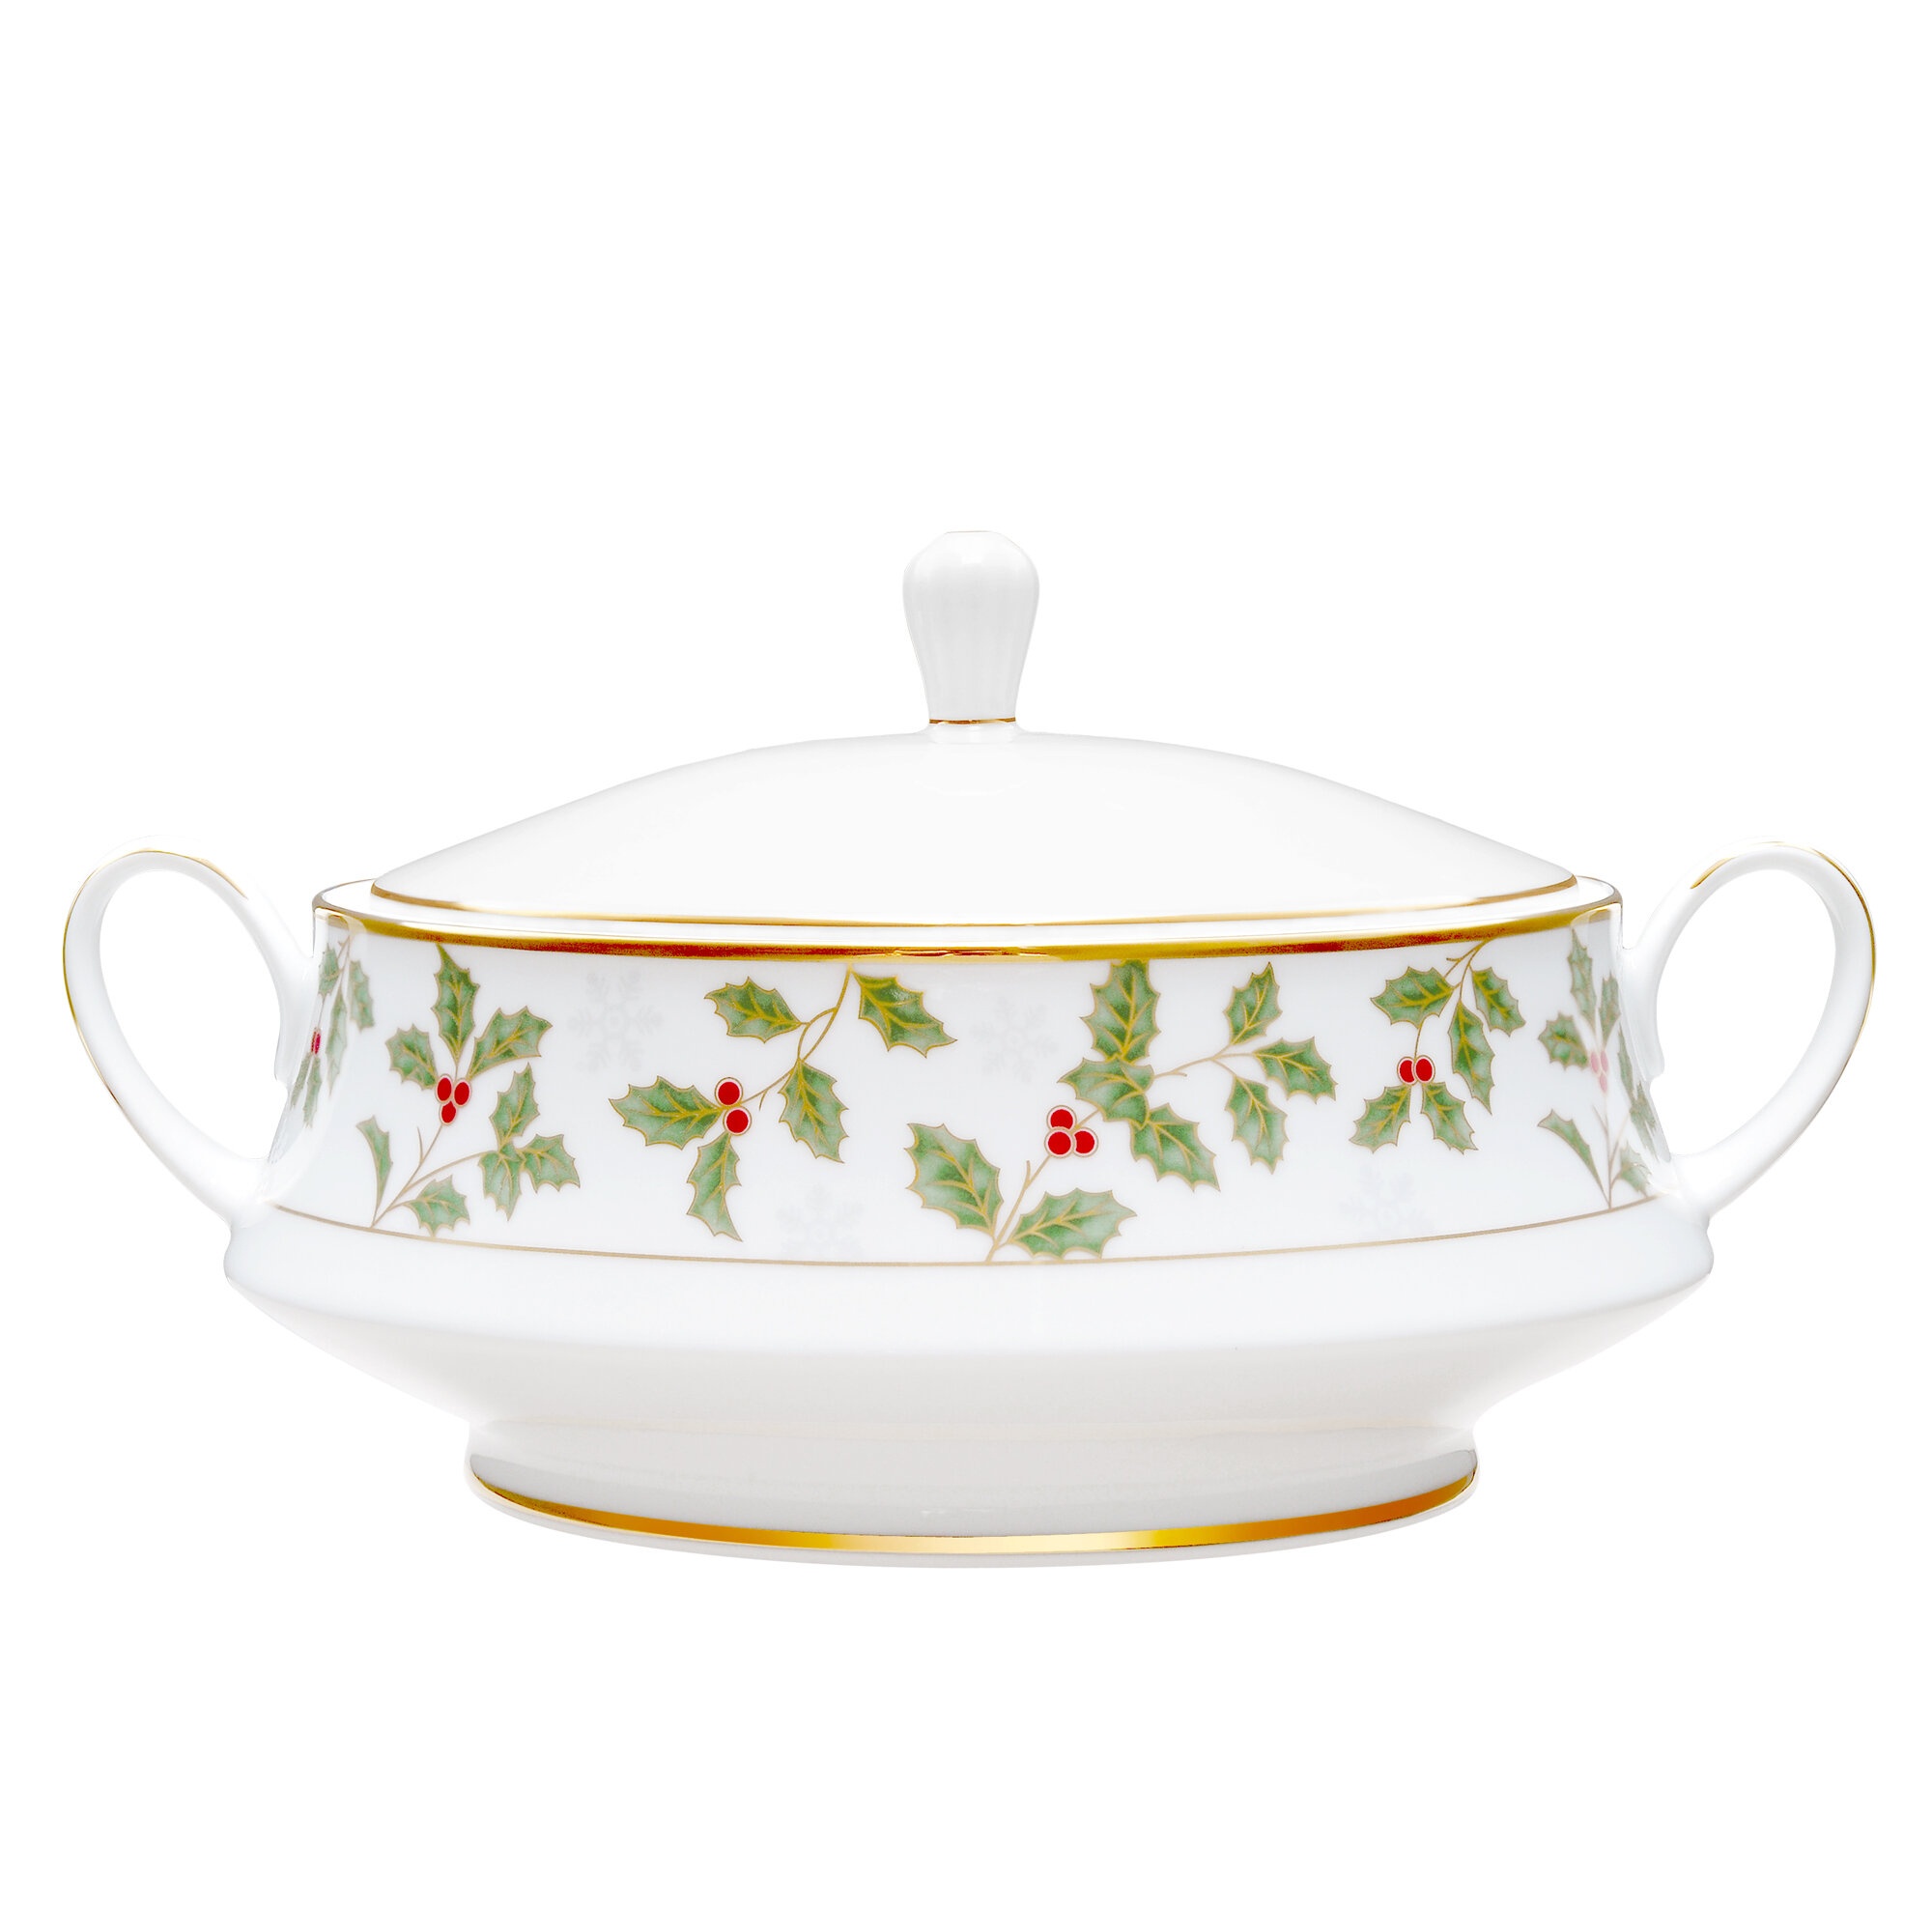 https://visualhunt.com/photos/23/noritake-holly-and-berry-gold-porcelain-china-vegetable-bowl.jpg